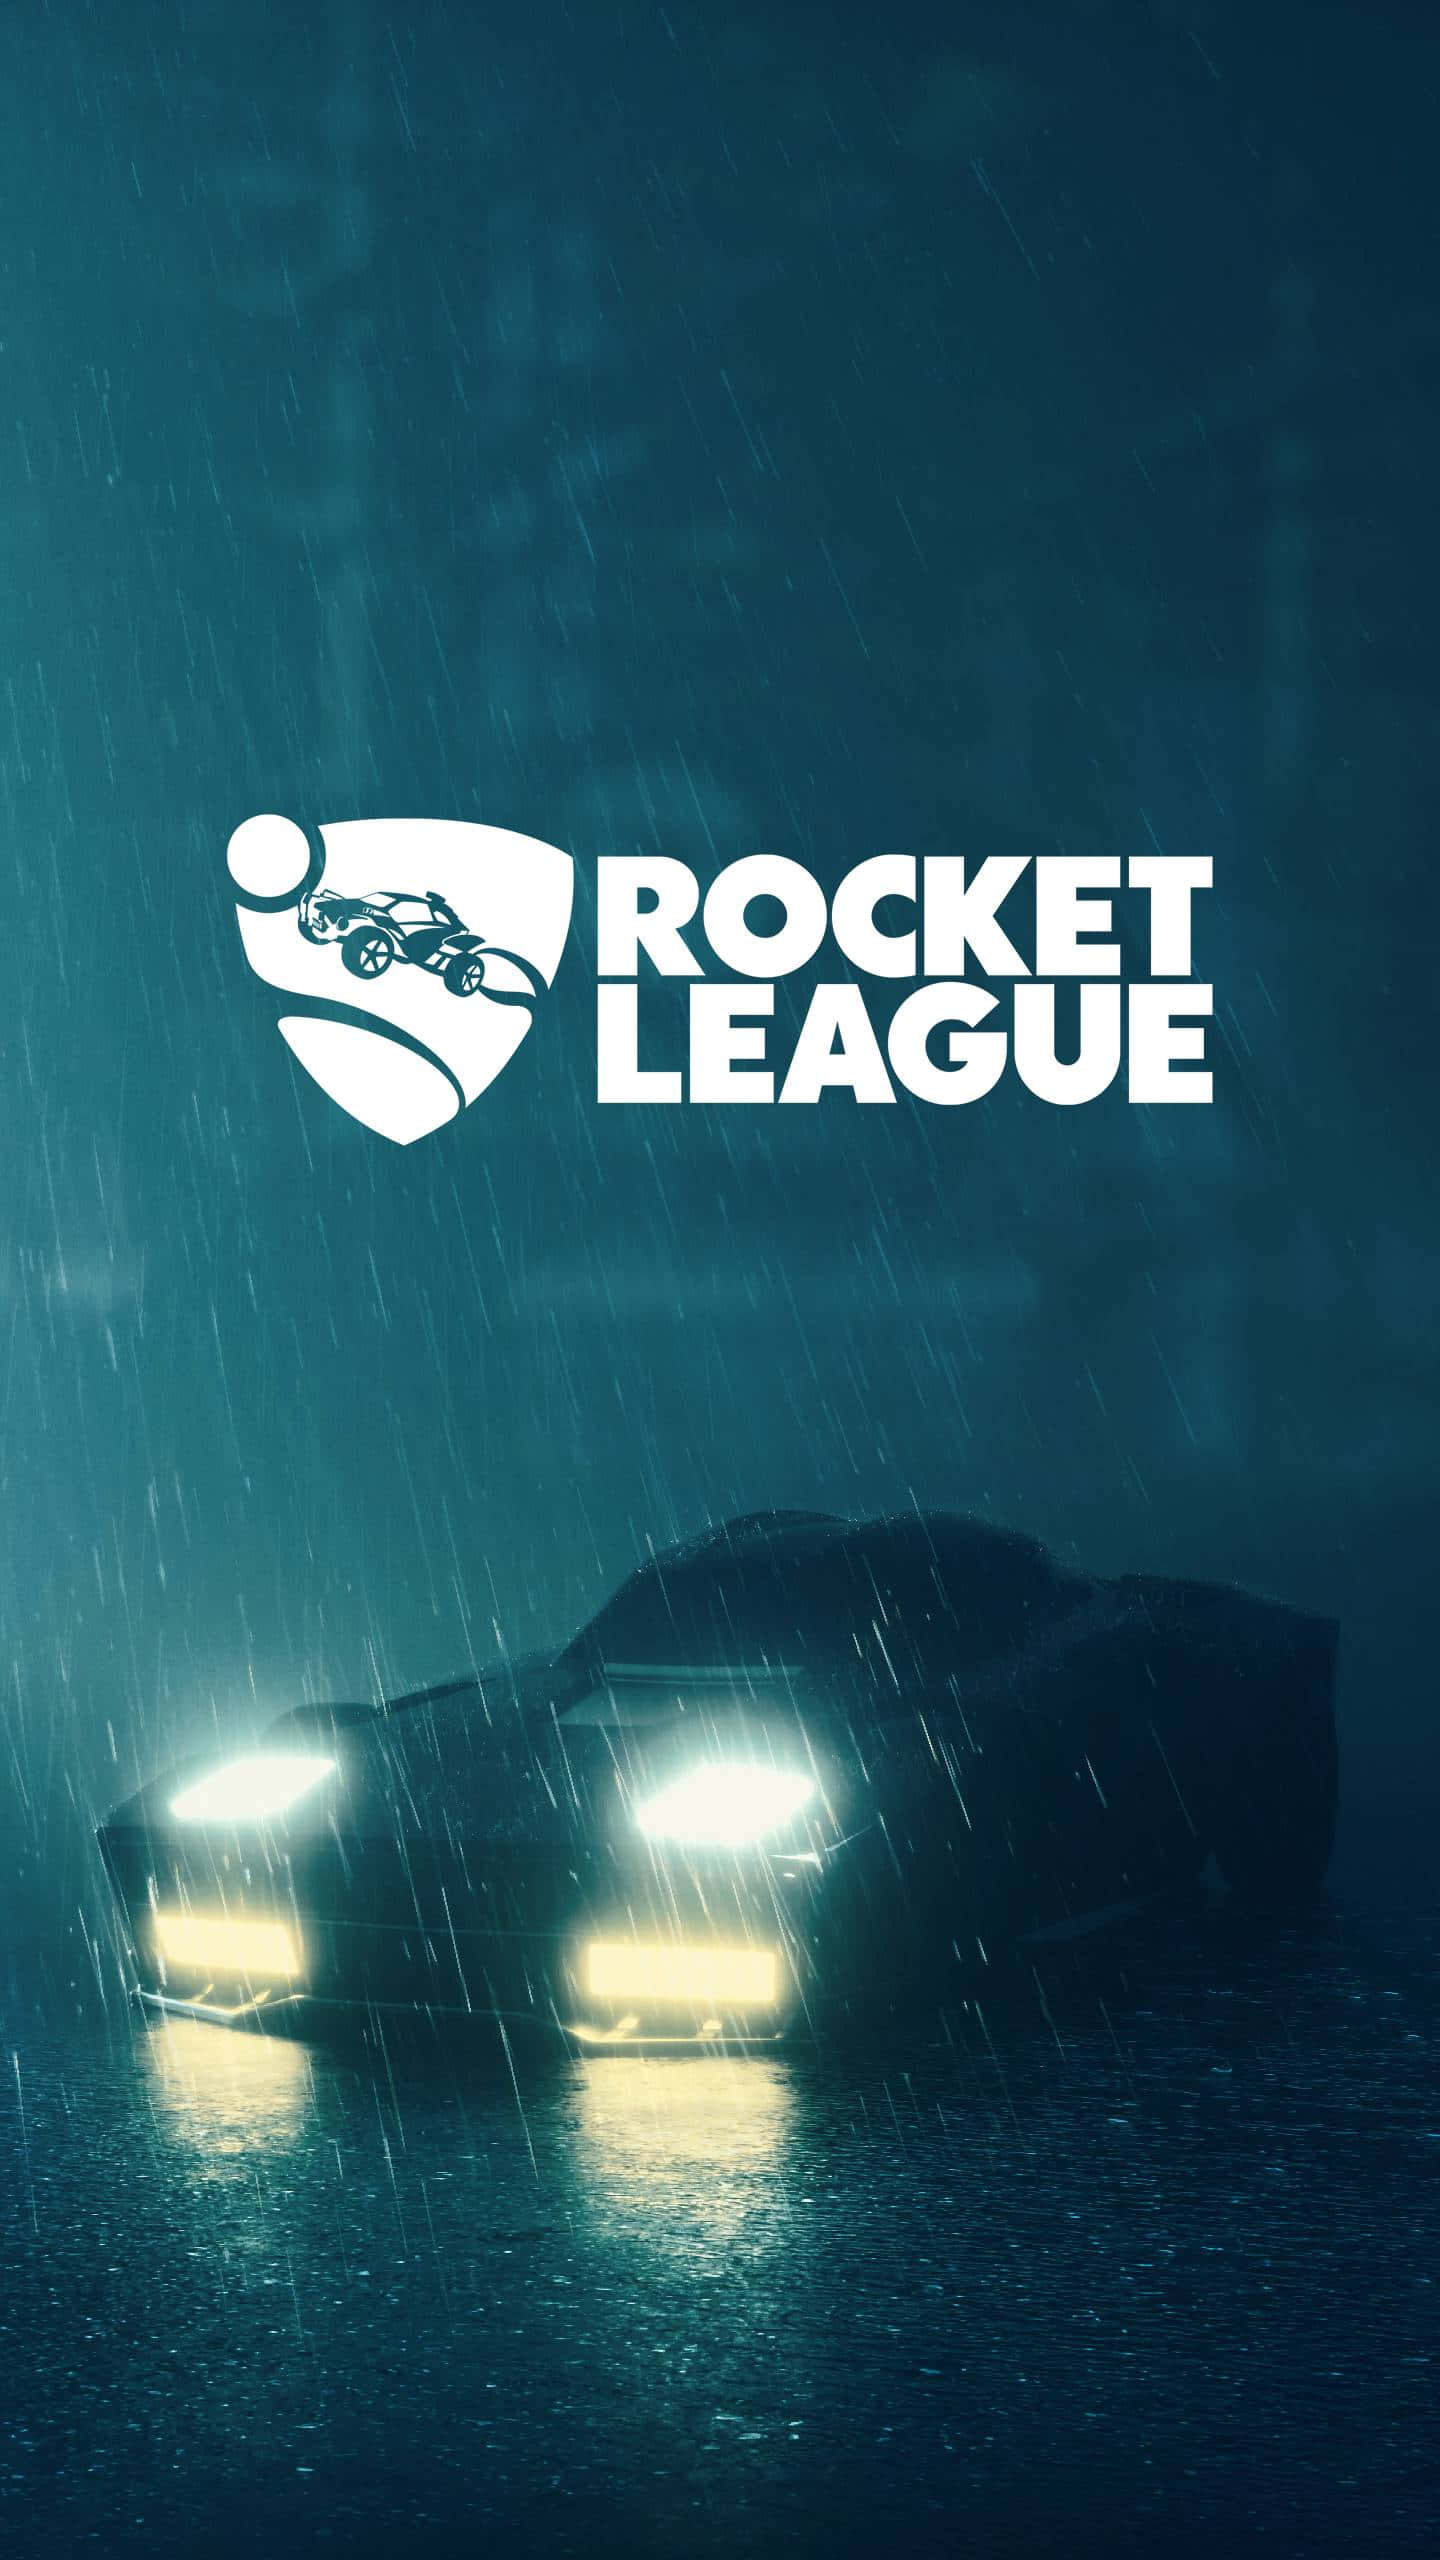 Rev your engine and score a goal in Rocket League!